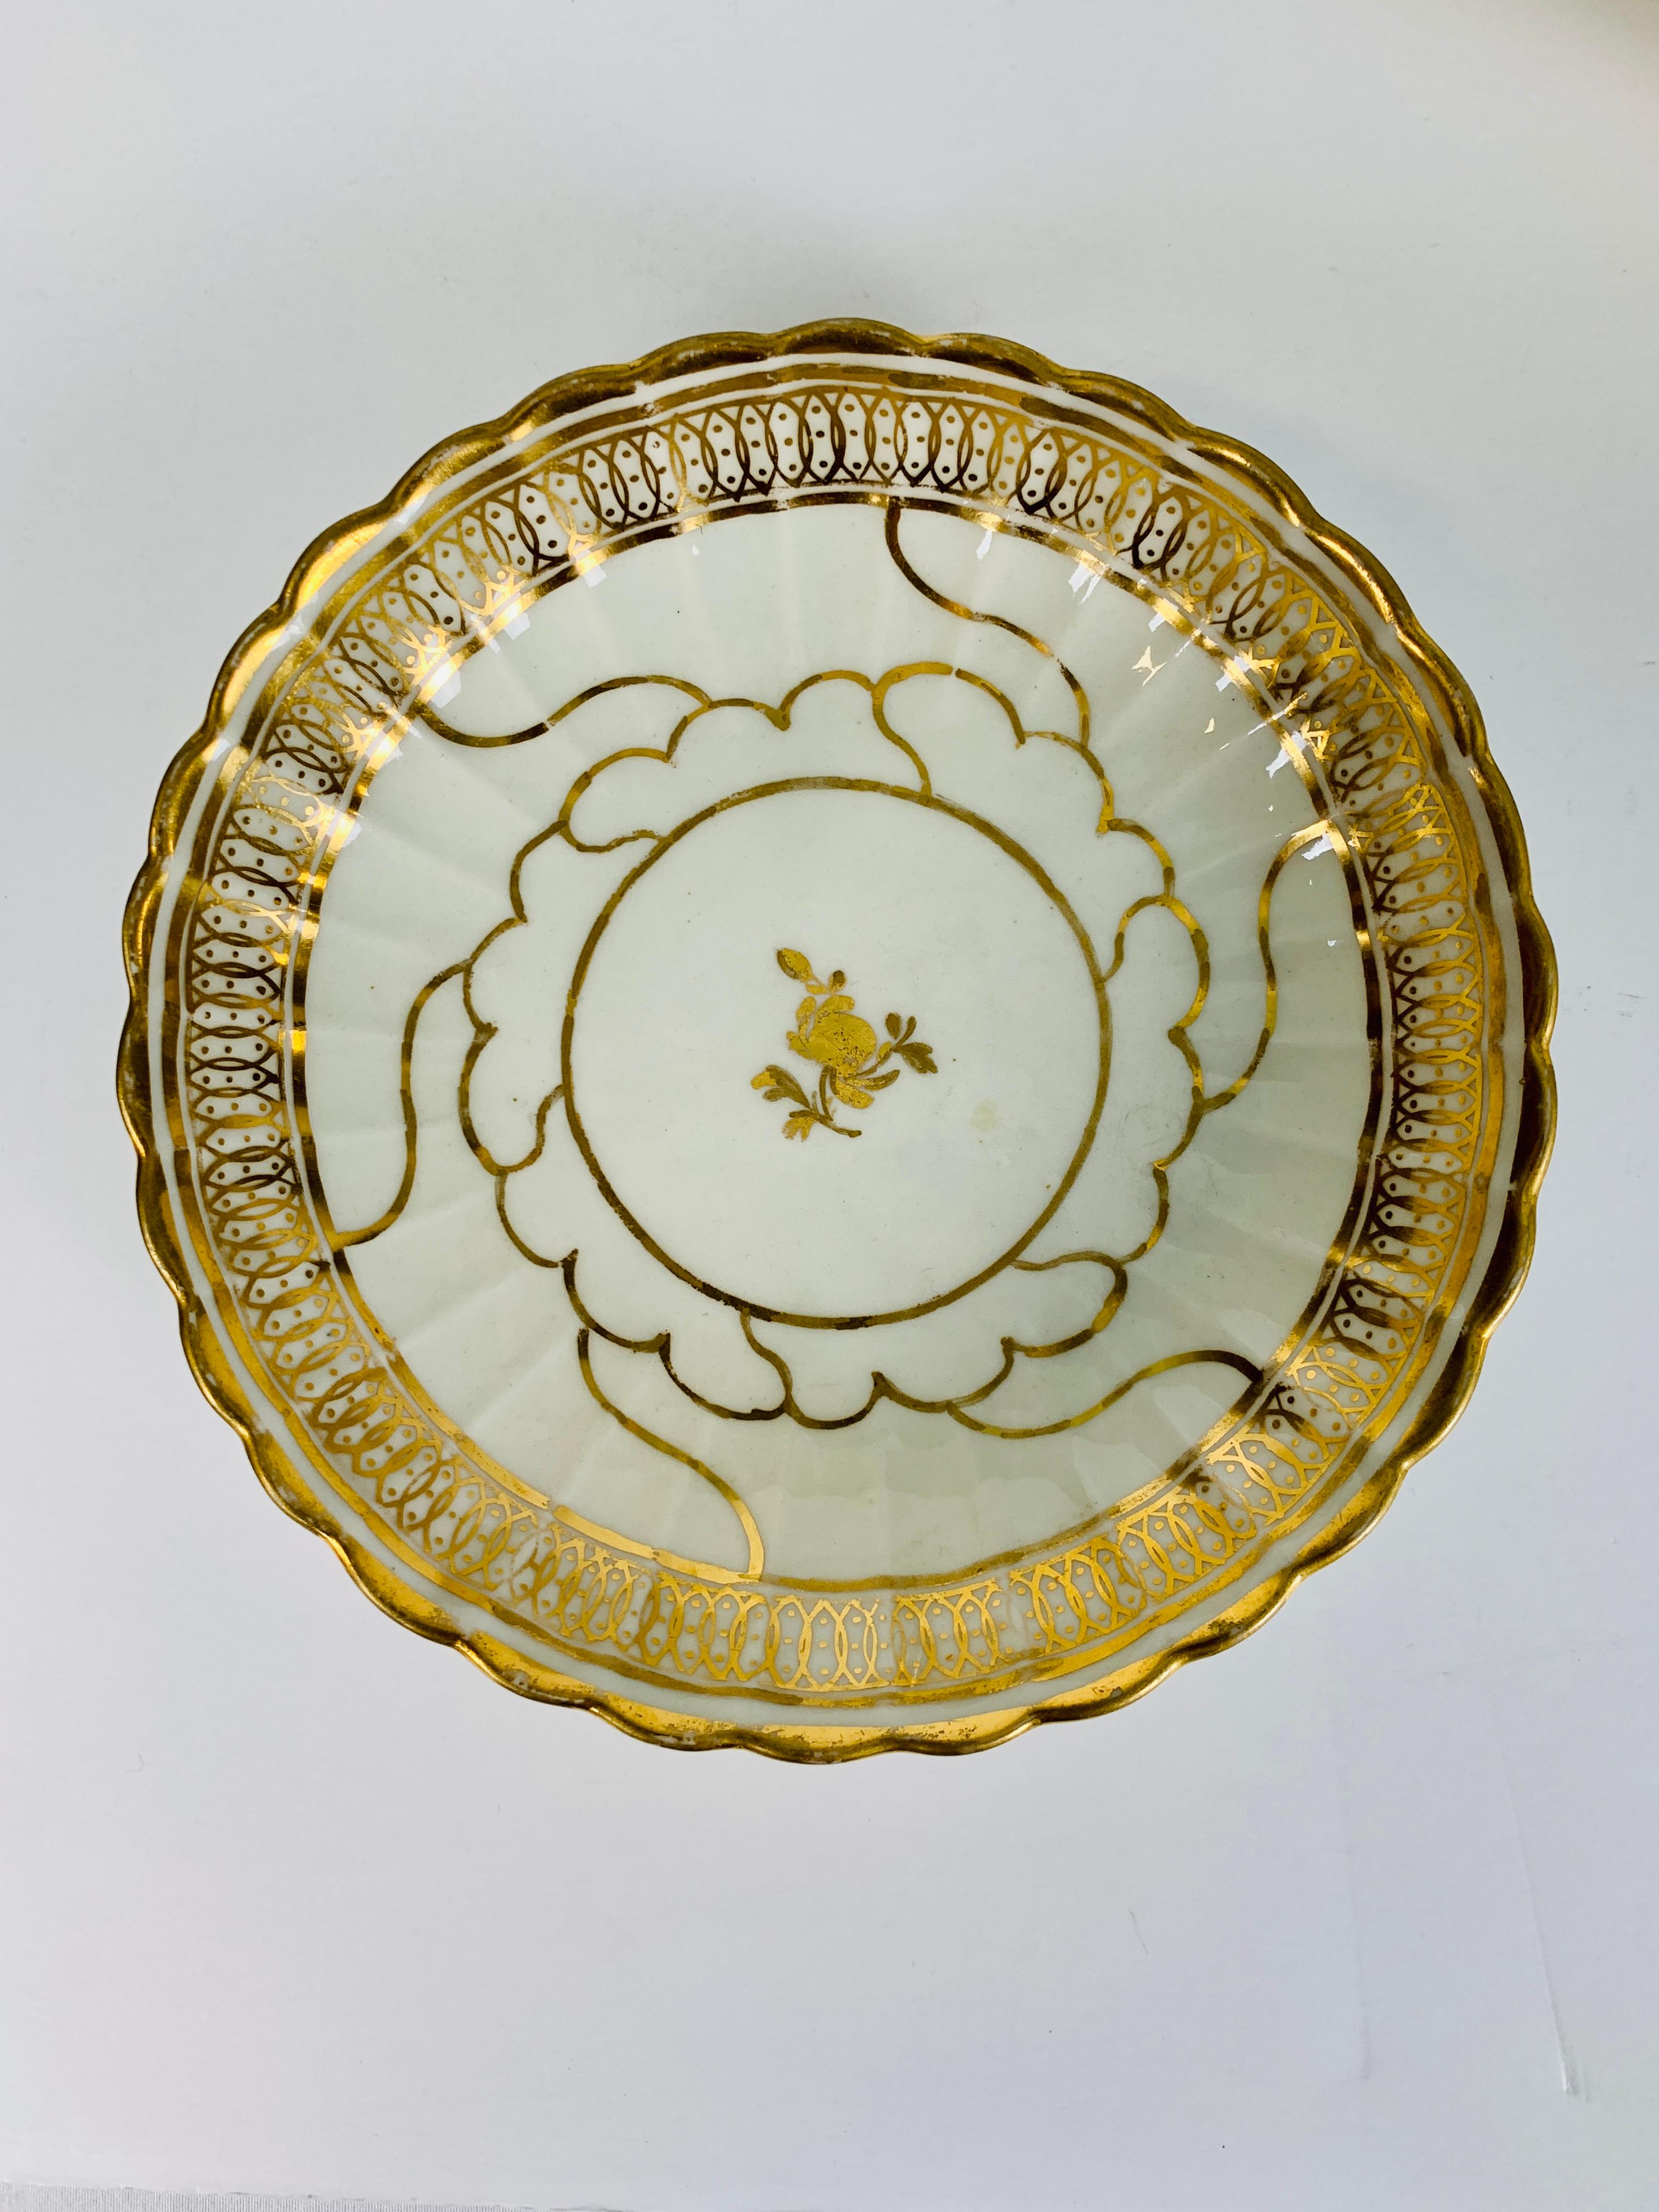 Provenance: The Private Collection of Mario Buatta
A group of five elegant Worcester white and gold saucers made in the Regency style in England circa 1810.
The white porcelain makes the lustrous Regency period gold stand out.
Each piece has